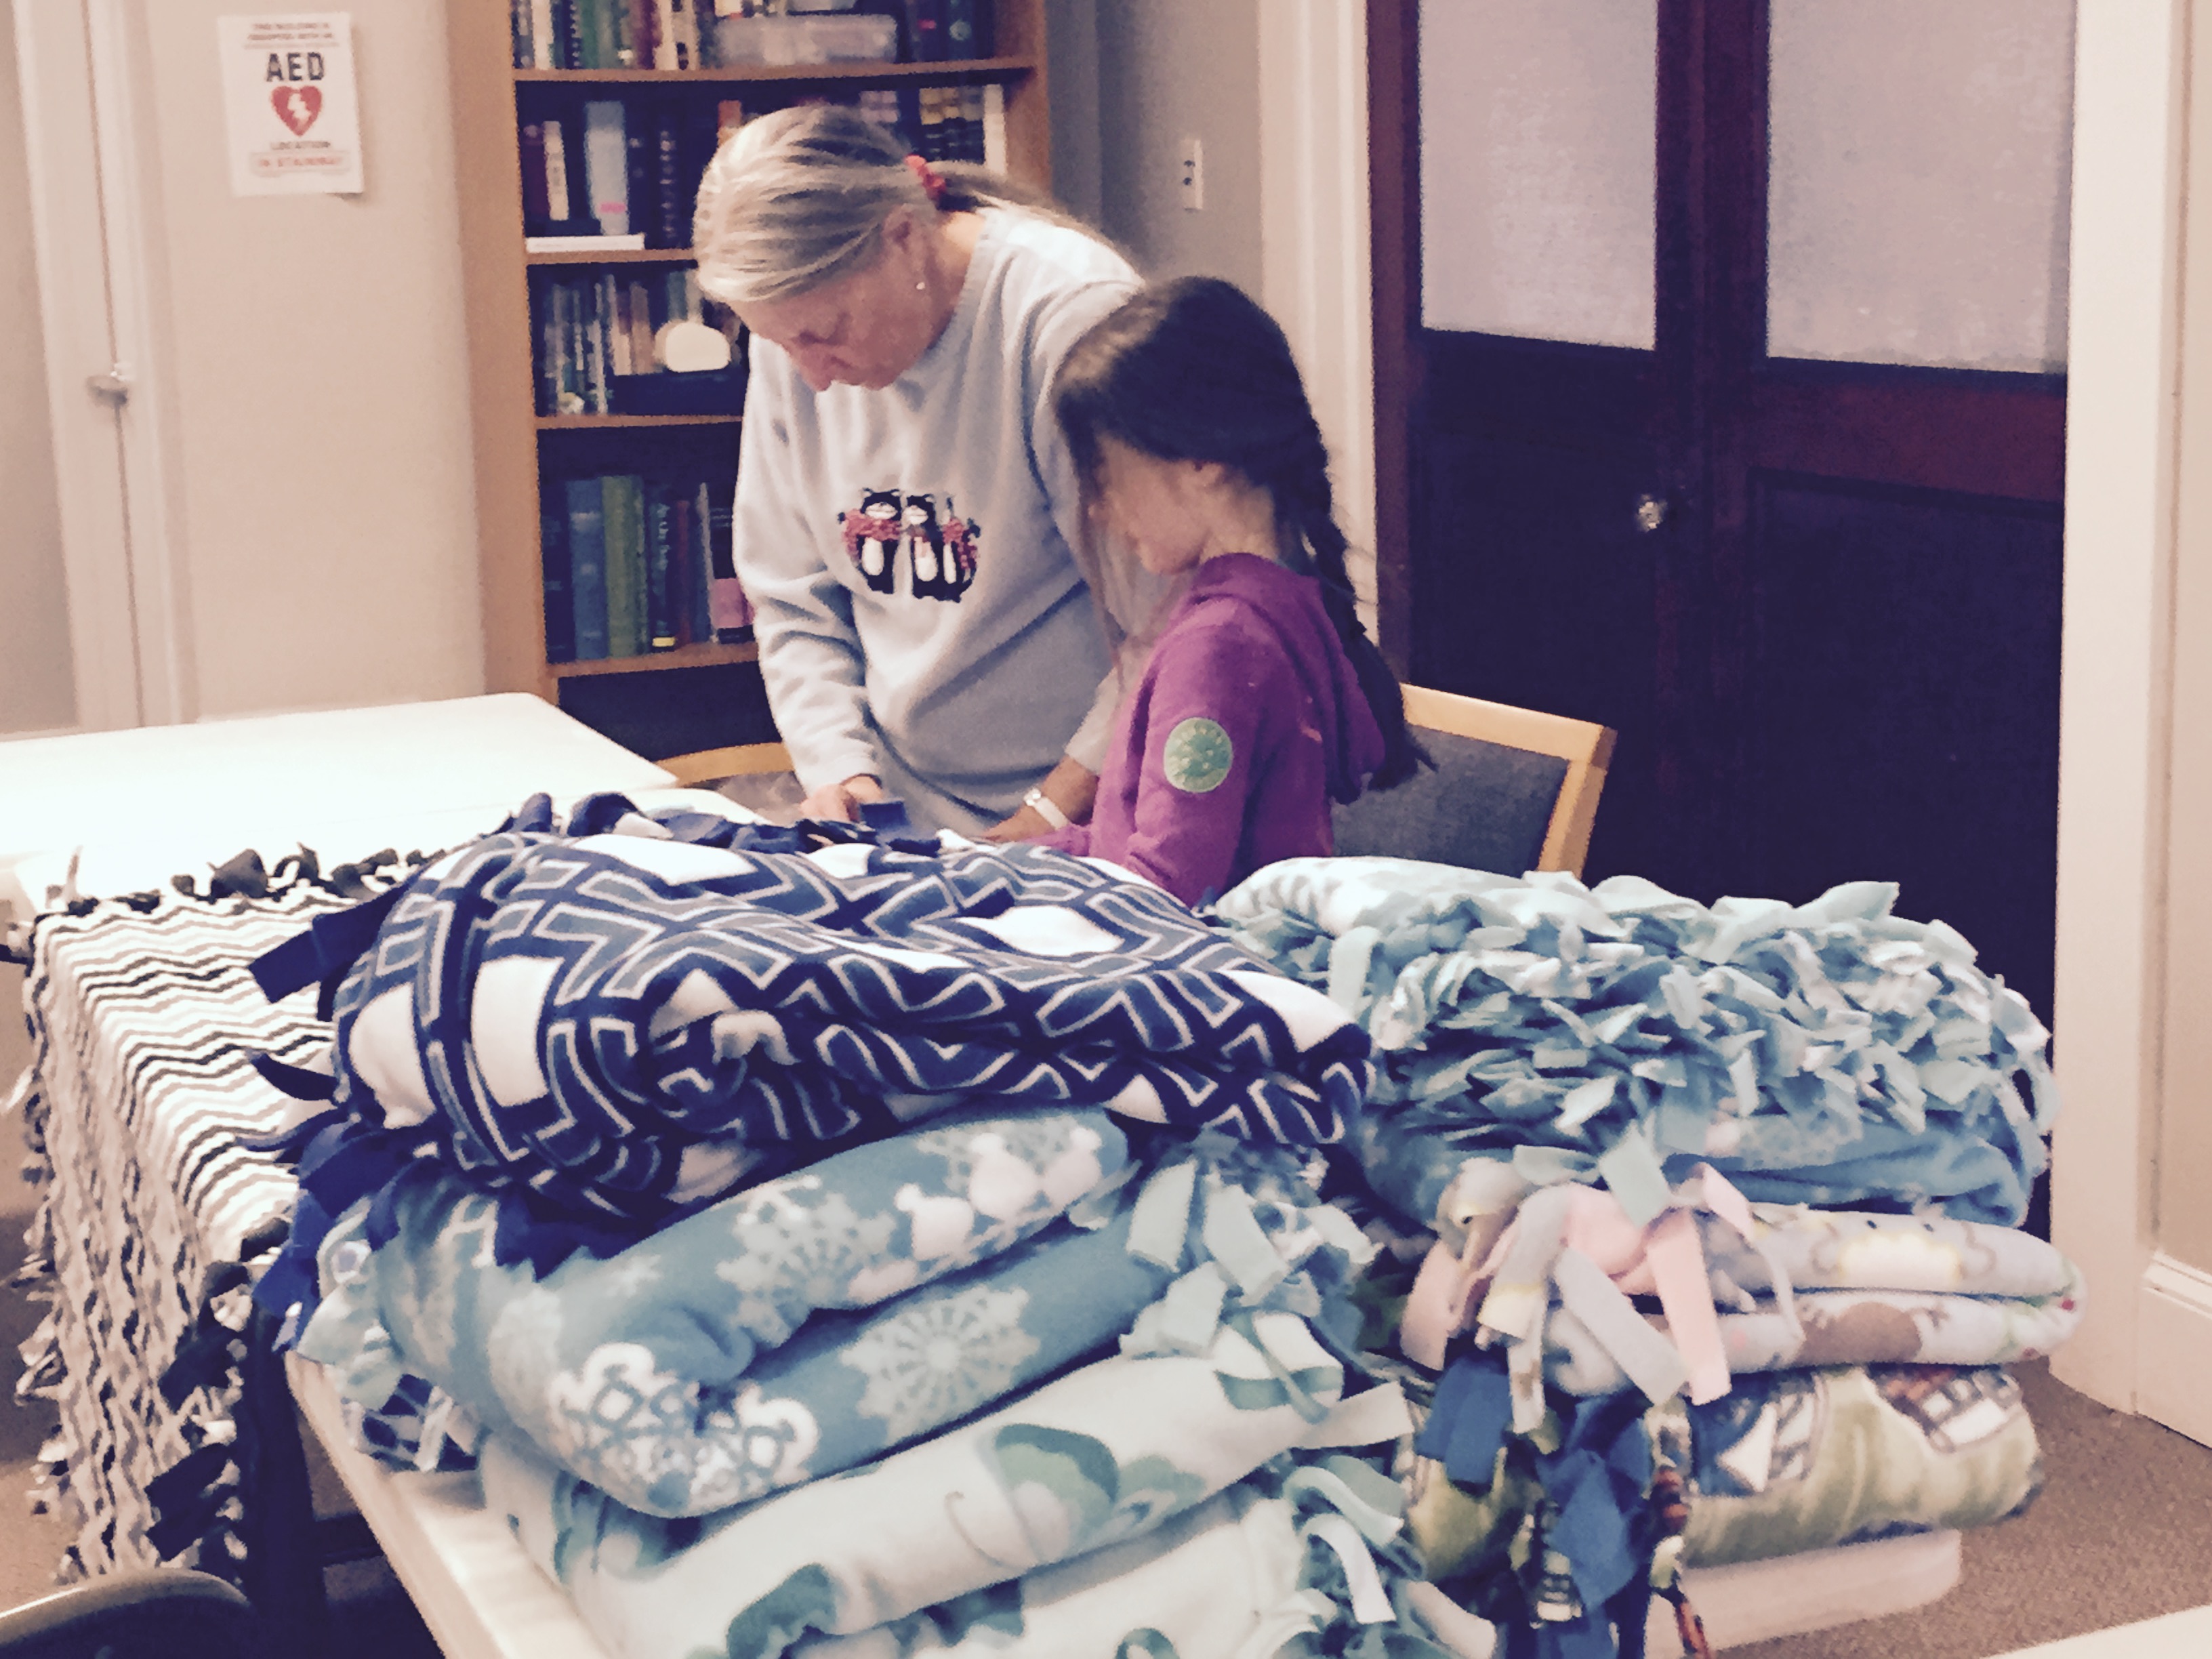 Volunteers prepare the blankets for delivery to those in need.